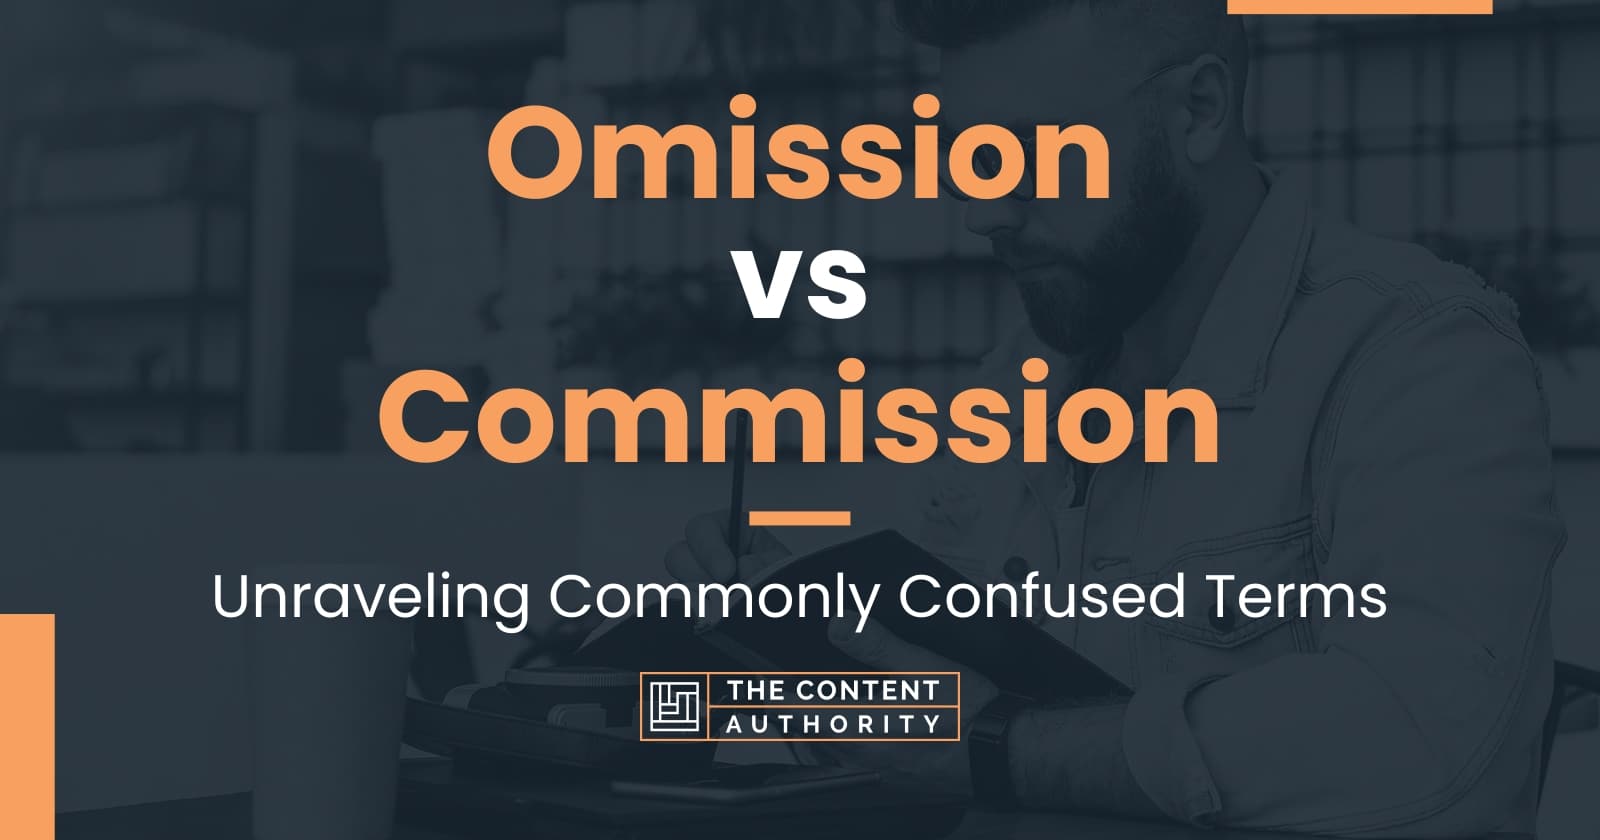 omission-vs-commission-unraveling-commonly-confused-terms